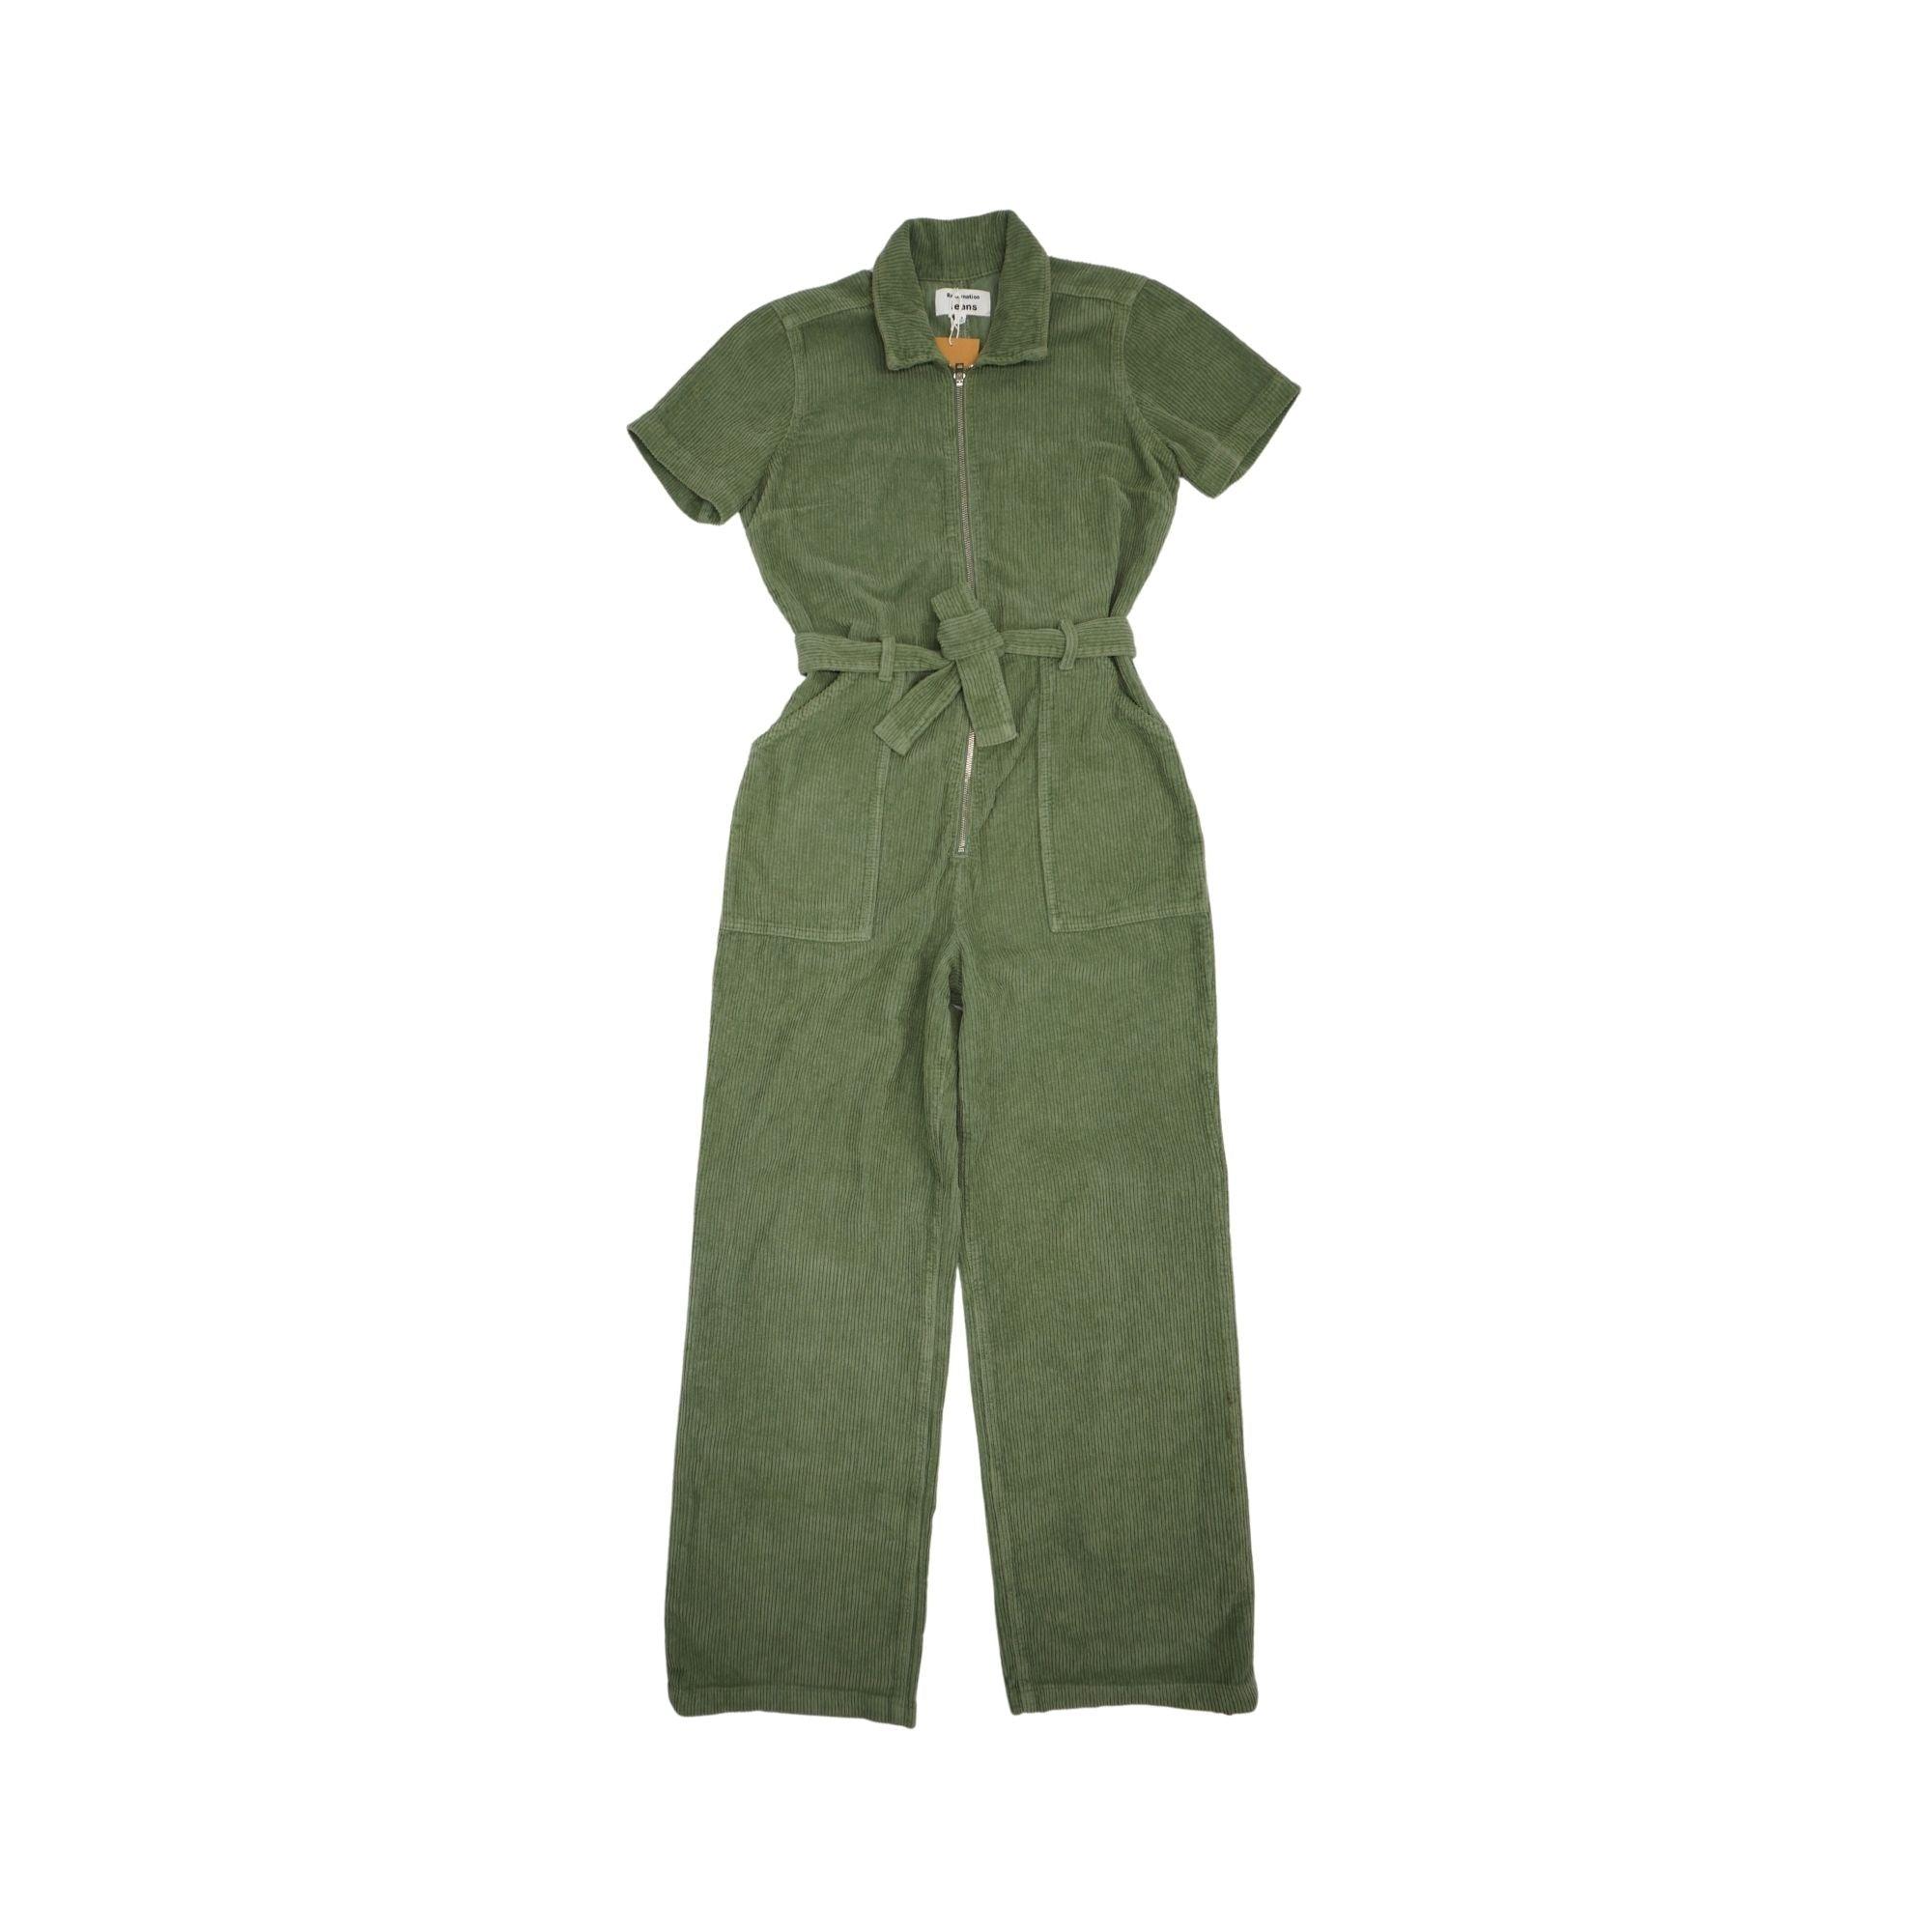 Reformation Jumpsuit - Women's 8 - Fashionably Yours